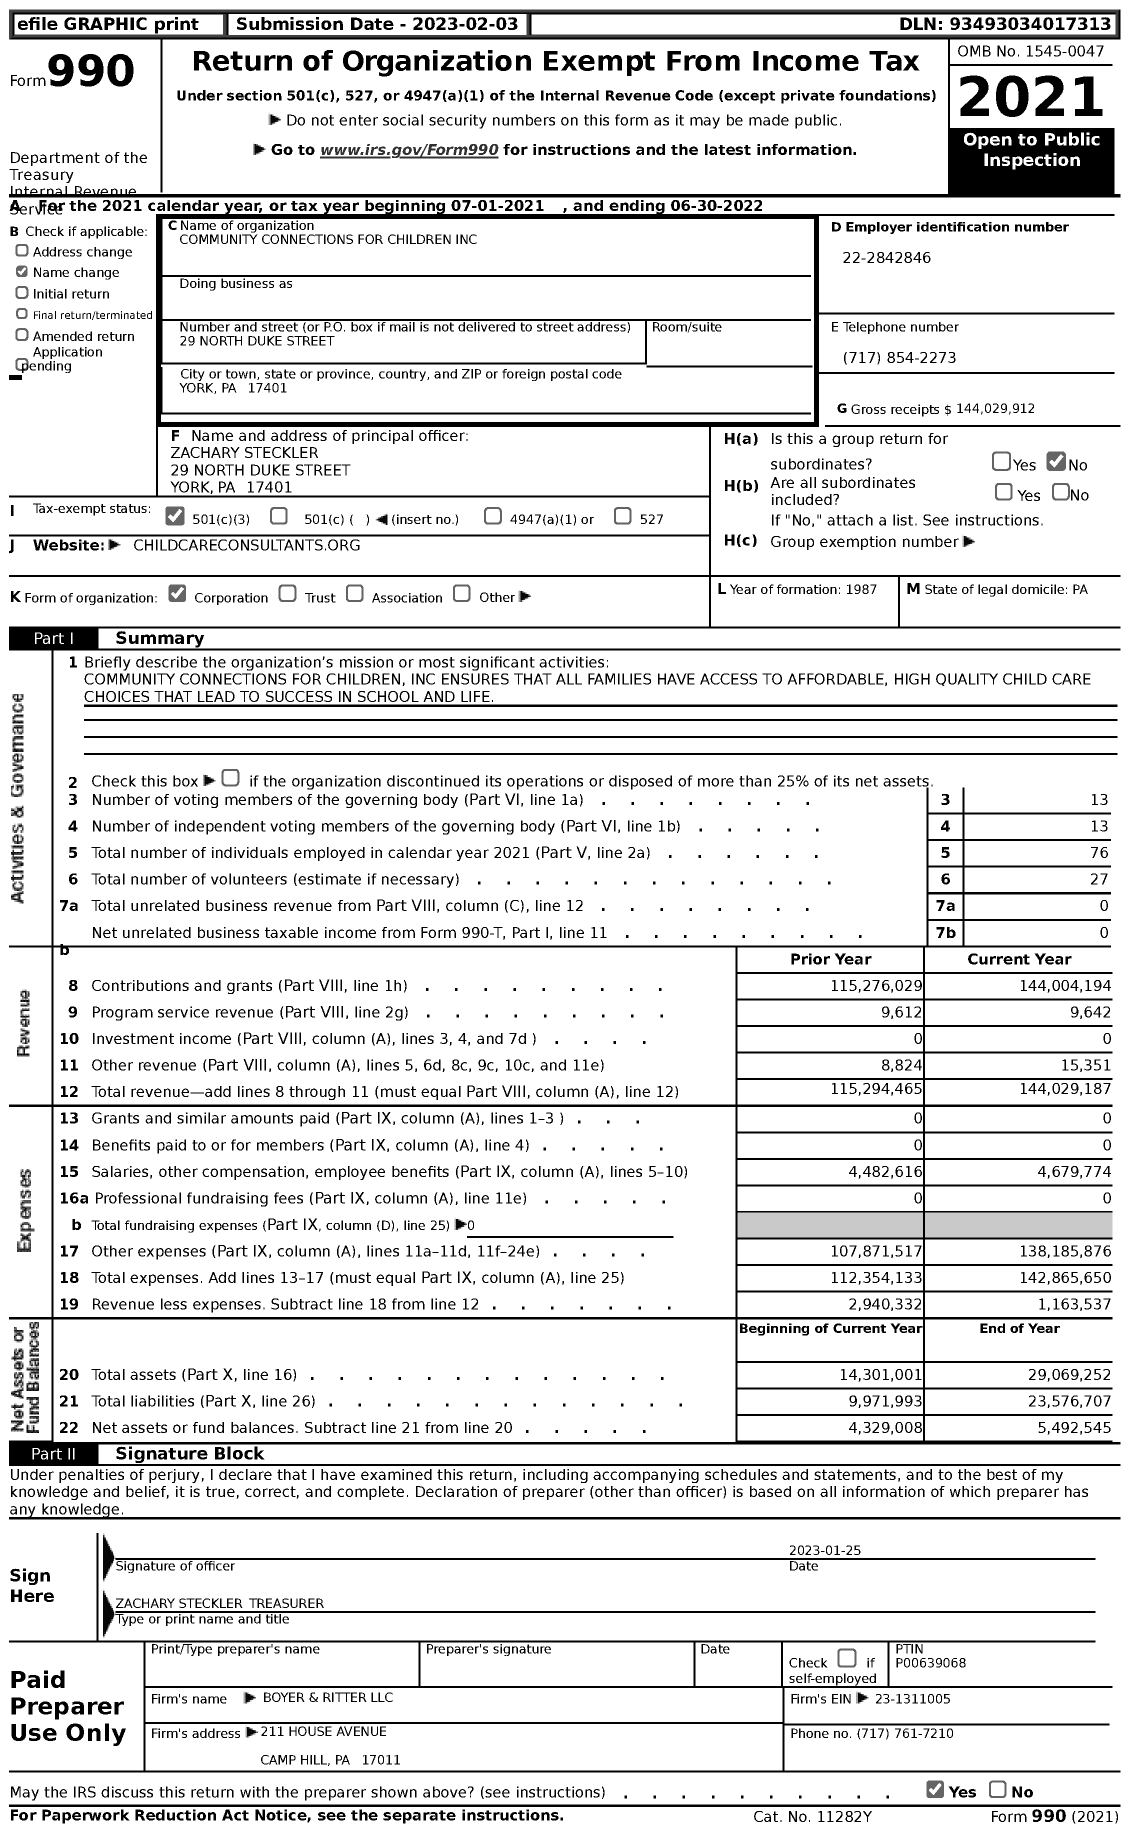 Image of first page of 2021 Form 990 for Community Connections for Children (CCC)